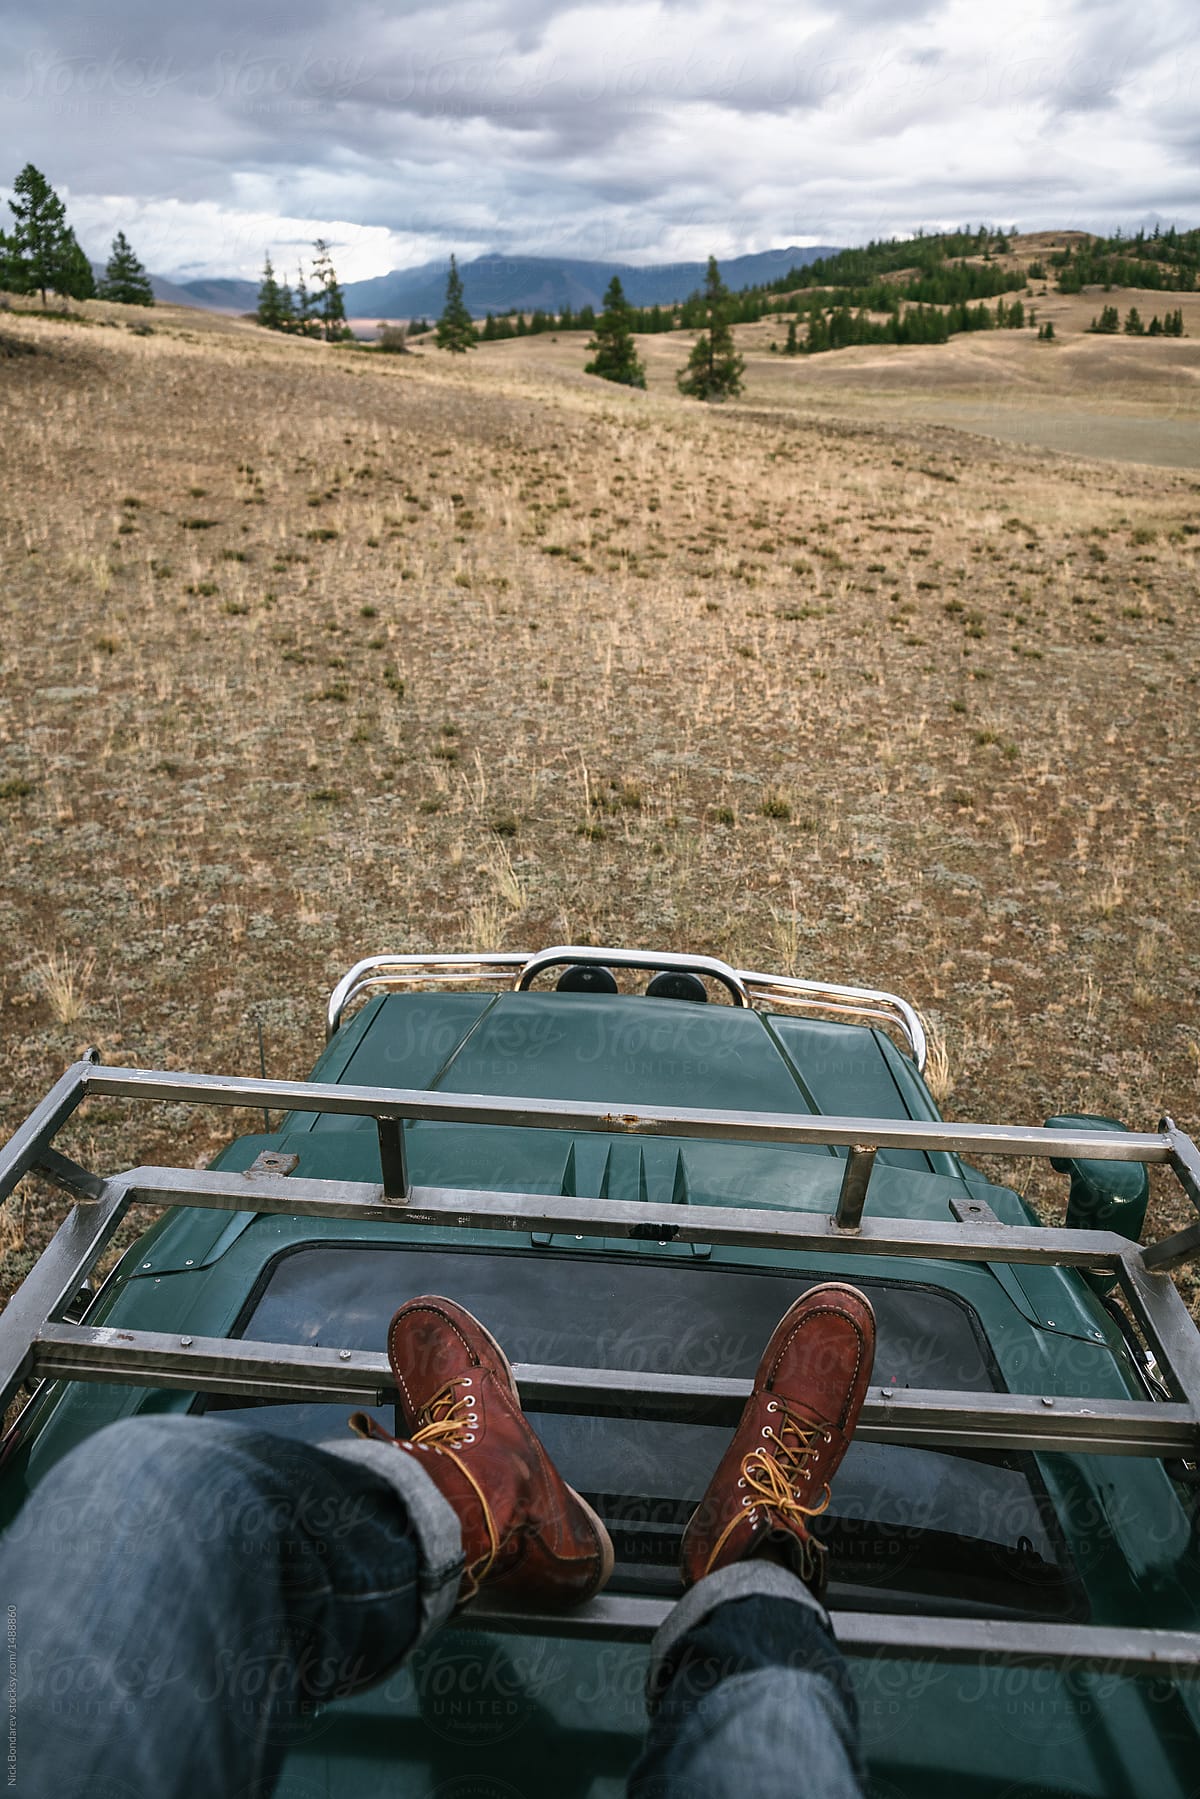 Pov image of anonymous male feet on old jeep parked in the wild area